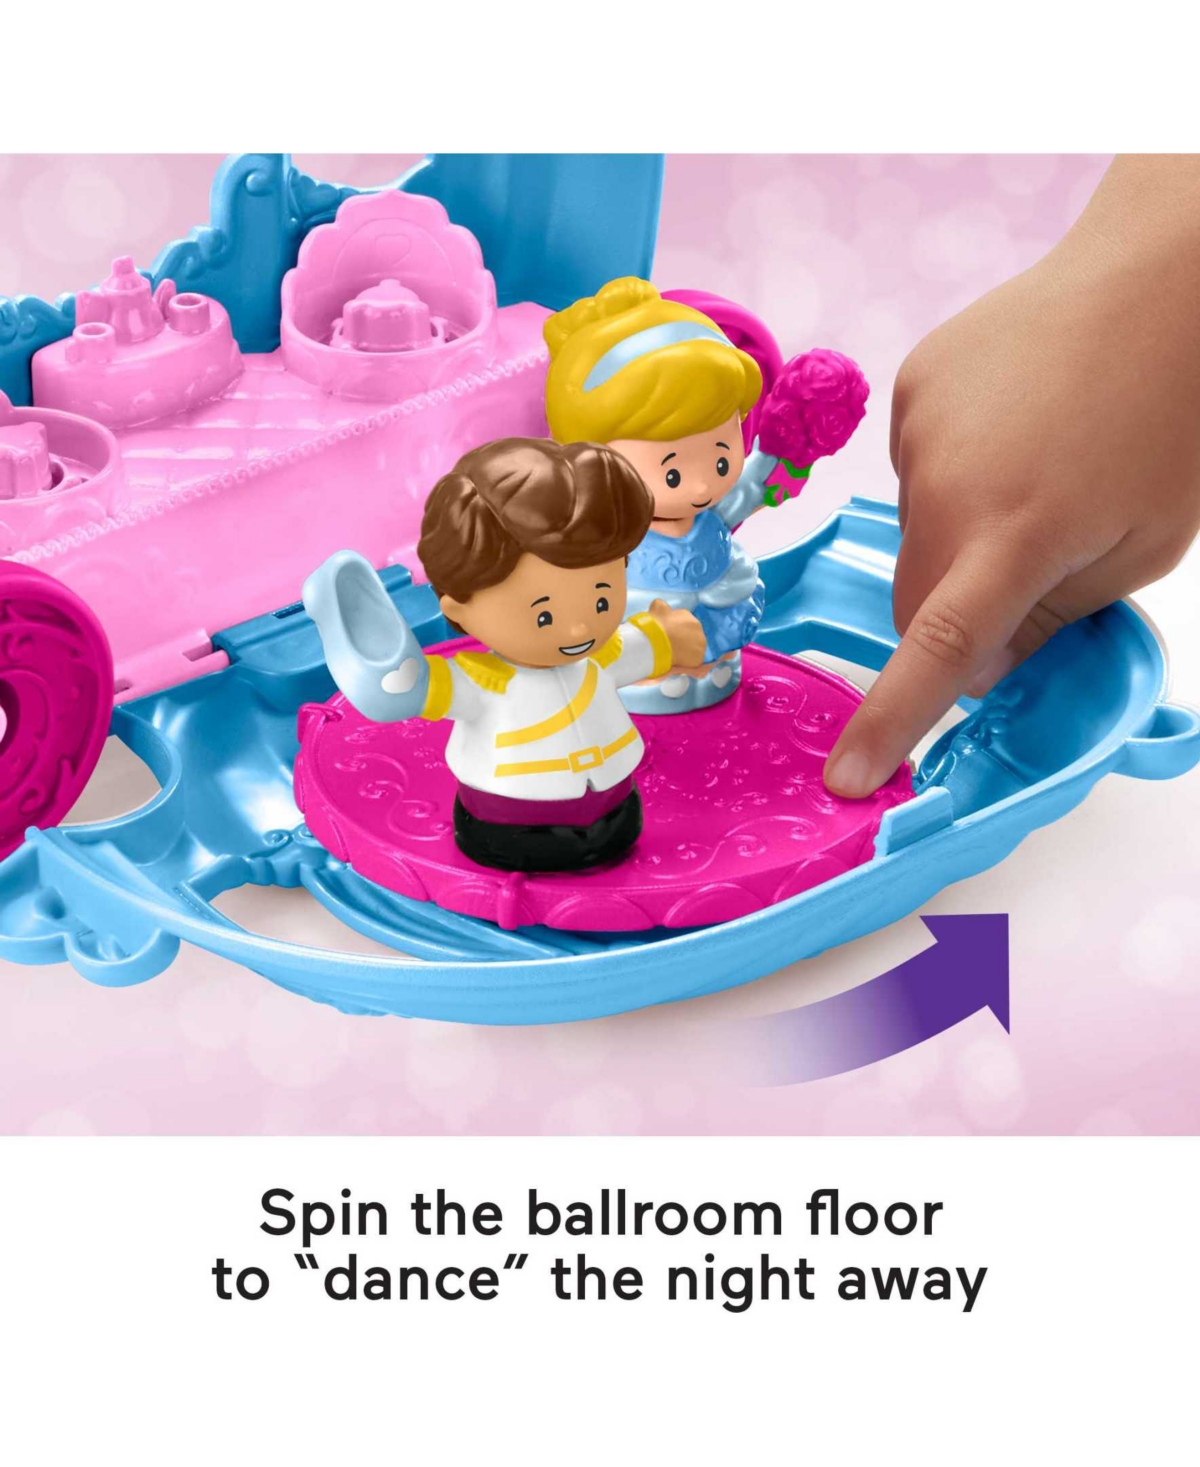 Shop Fisher Price Disney Princess Cinderella's Dancing Carriage By Little People Set In Multi